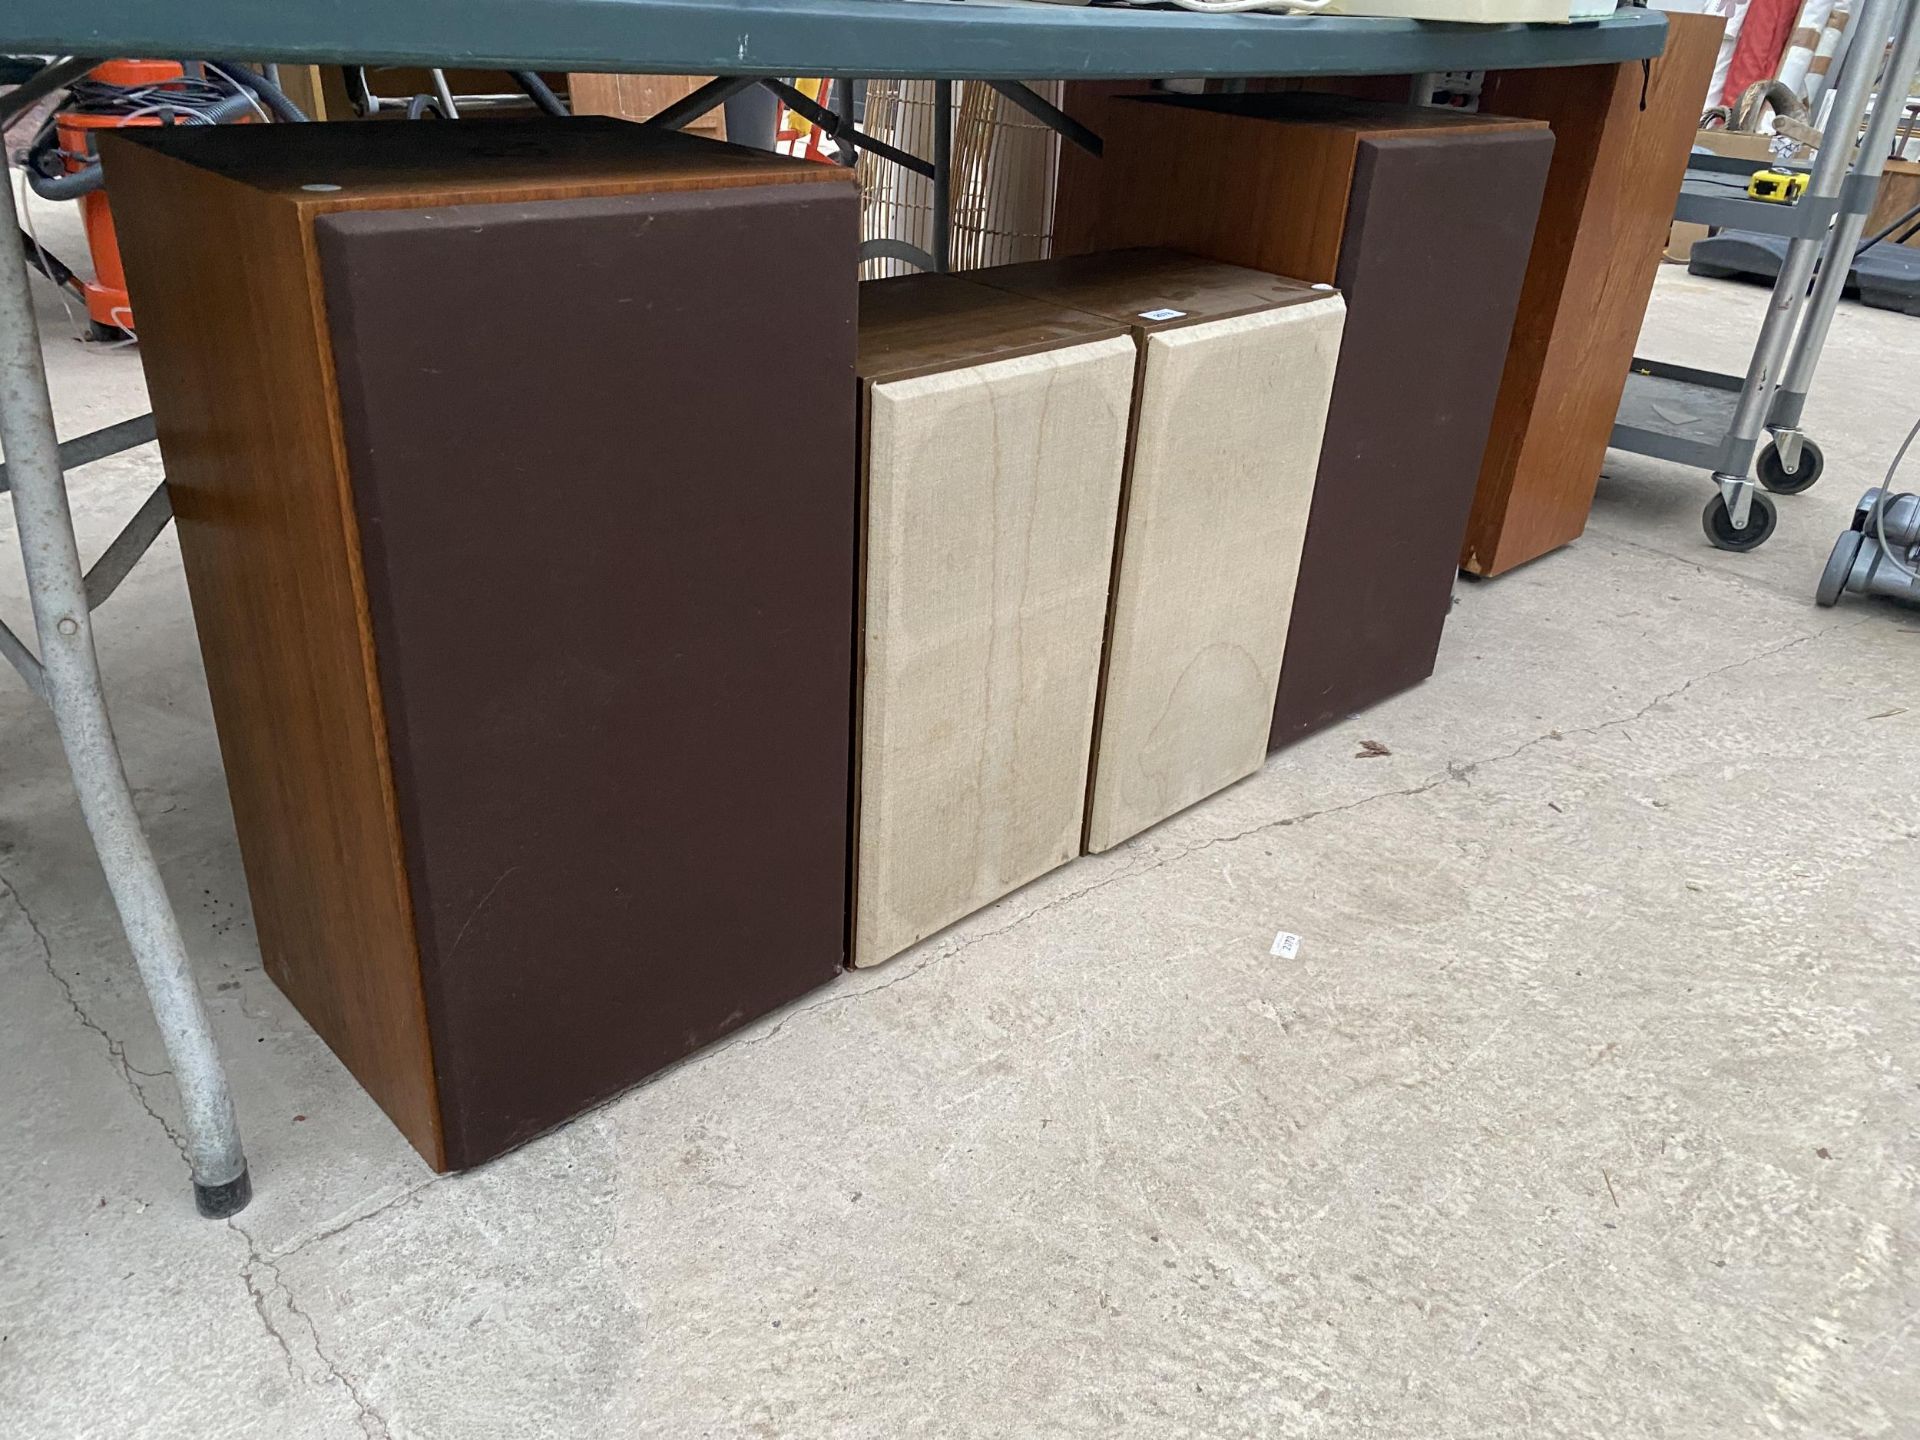 FOUR LARGE WOODEN CASED SPEAKERS (TWO PAIRS) - Image 2 of 2